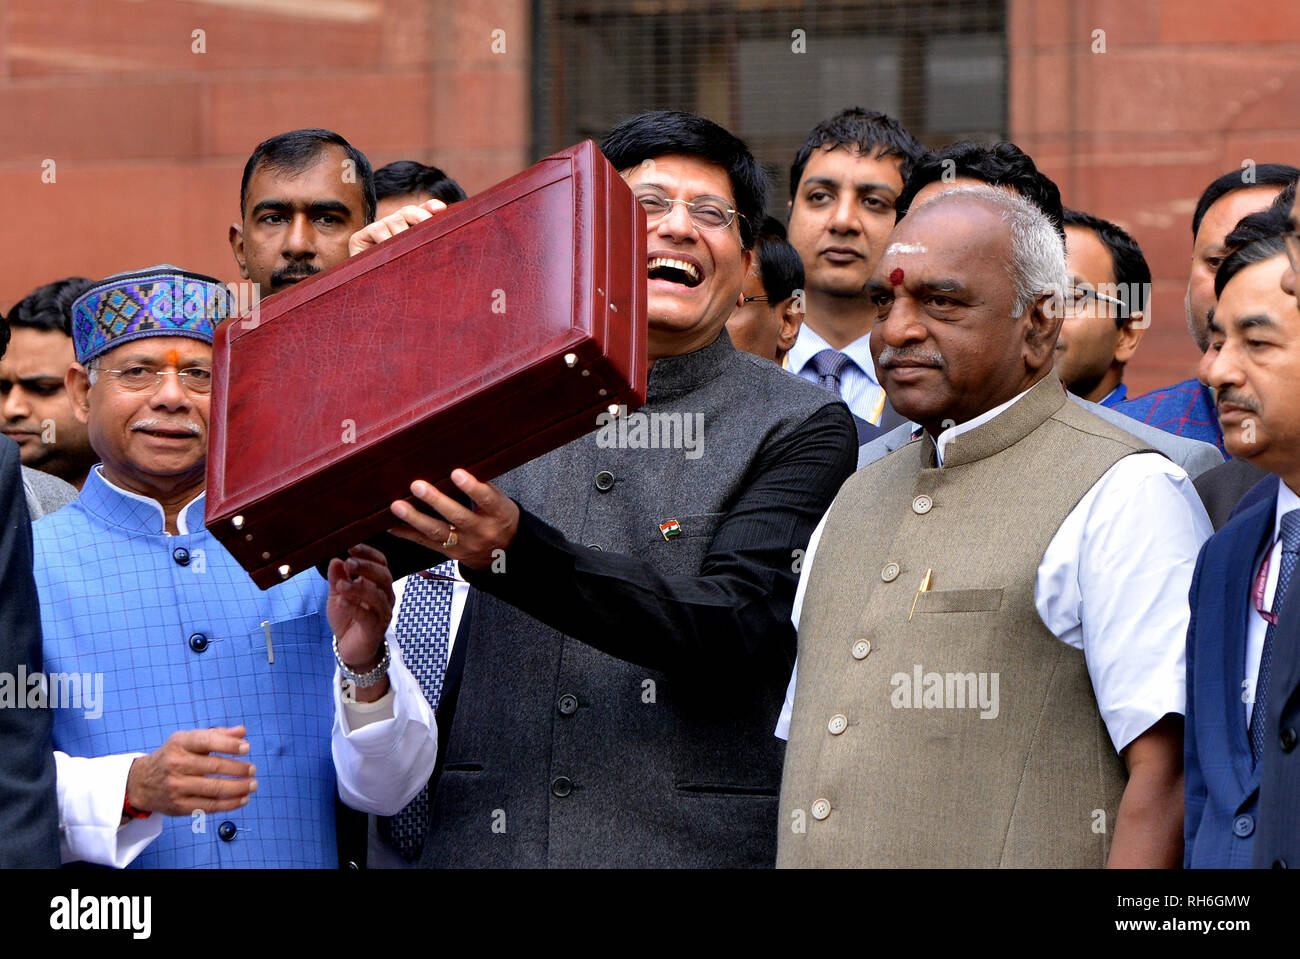 New Delhi, India. 1st Feb, 2019. Indian Finance Minister Piyush Goyal(C) holds a briefcase containing federal budget documents as he leaves his office for the parliament house in New Delhi, India, on Feb. 1, 2019. Credit: Partha Sarkar /Xinhua/Alamy Live News Stock Photo